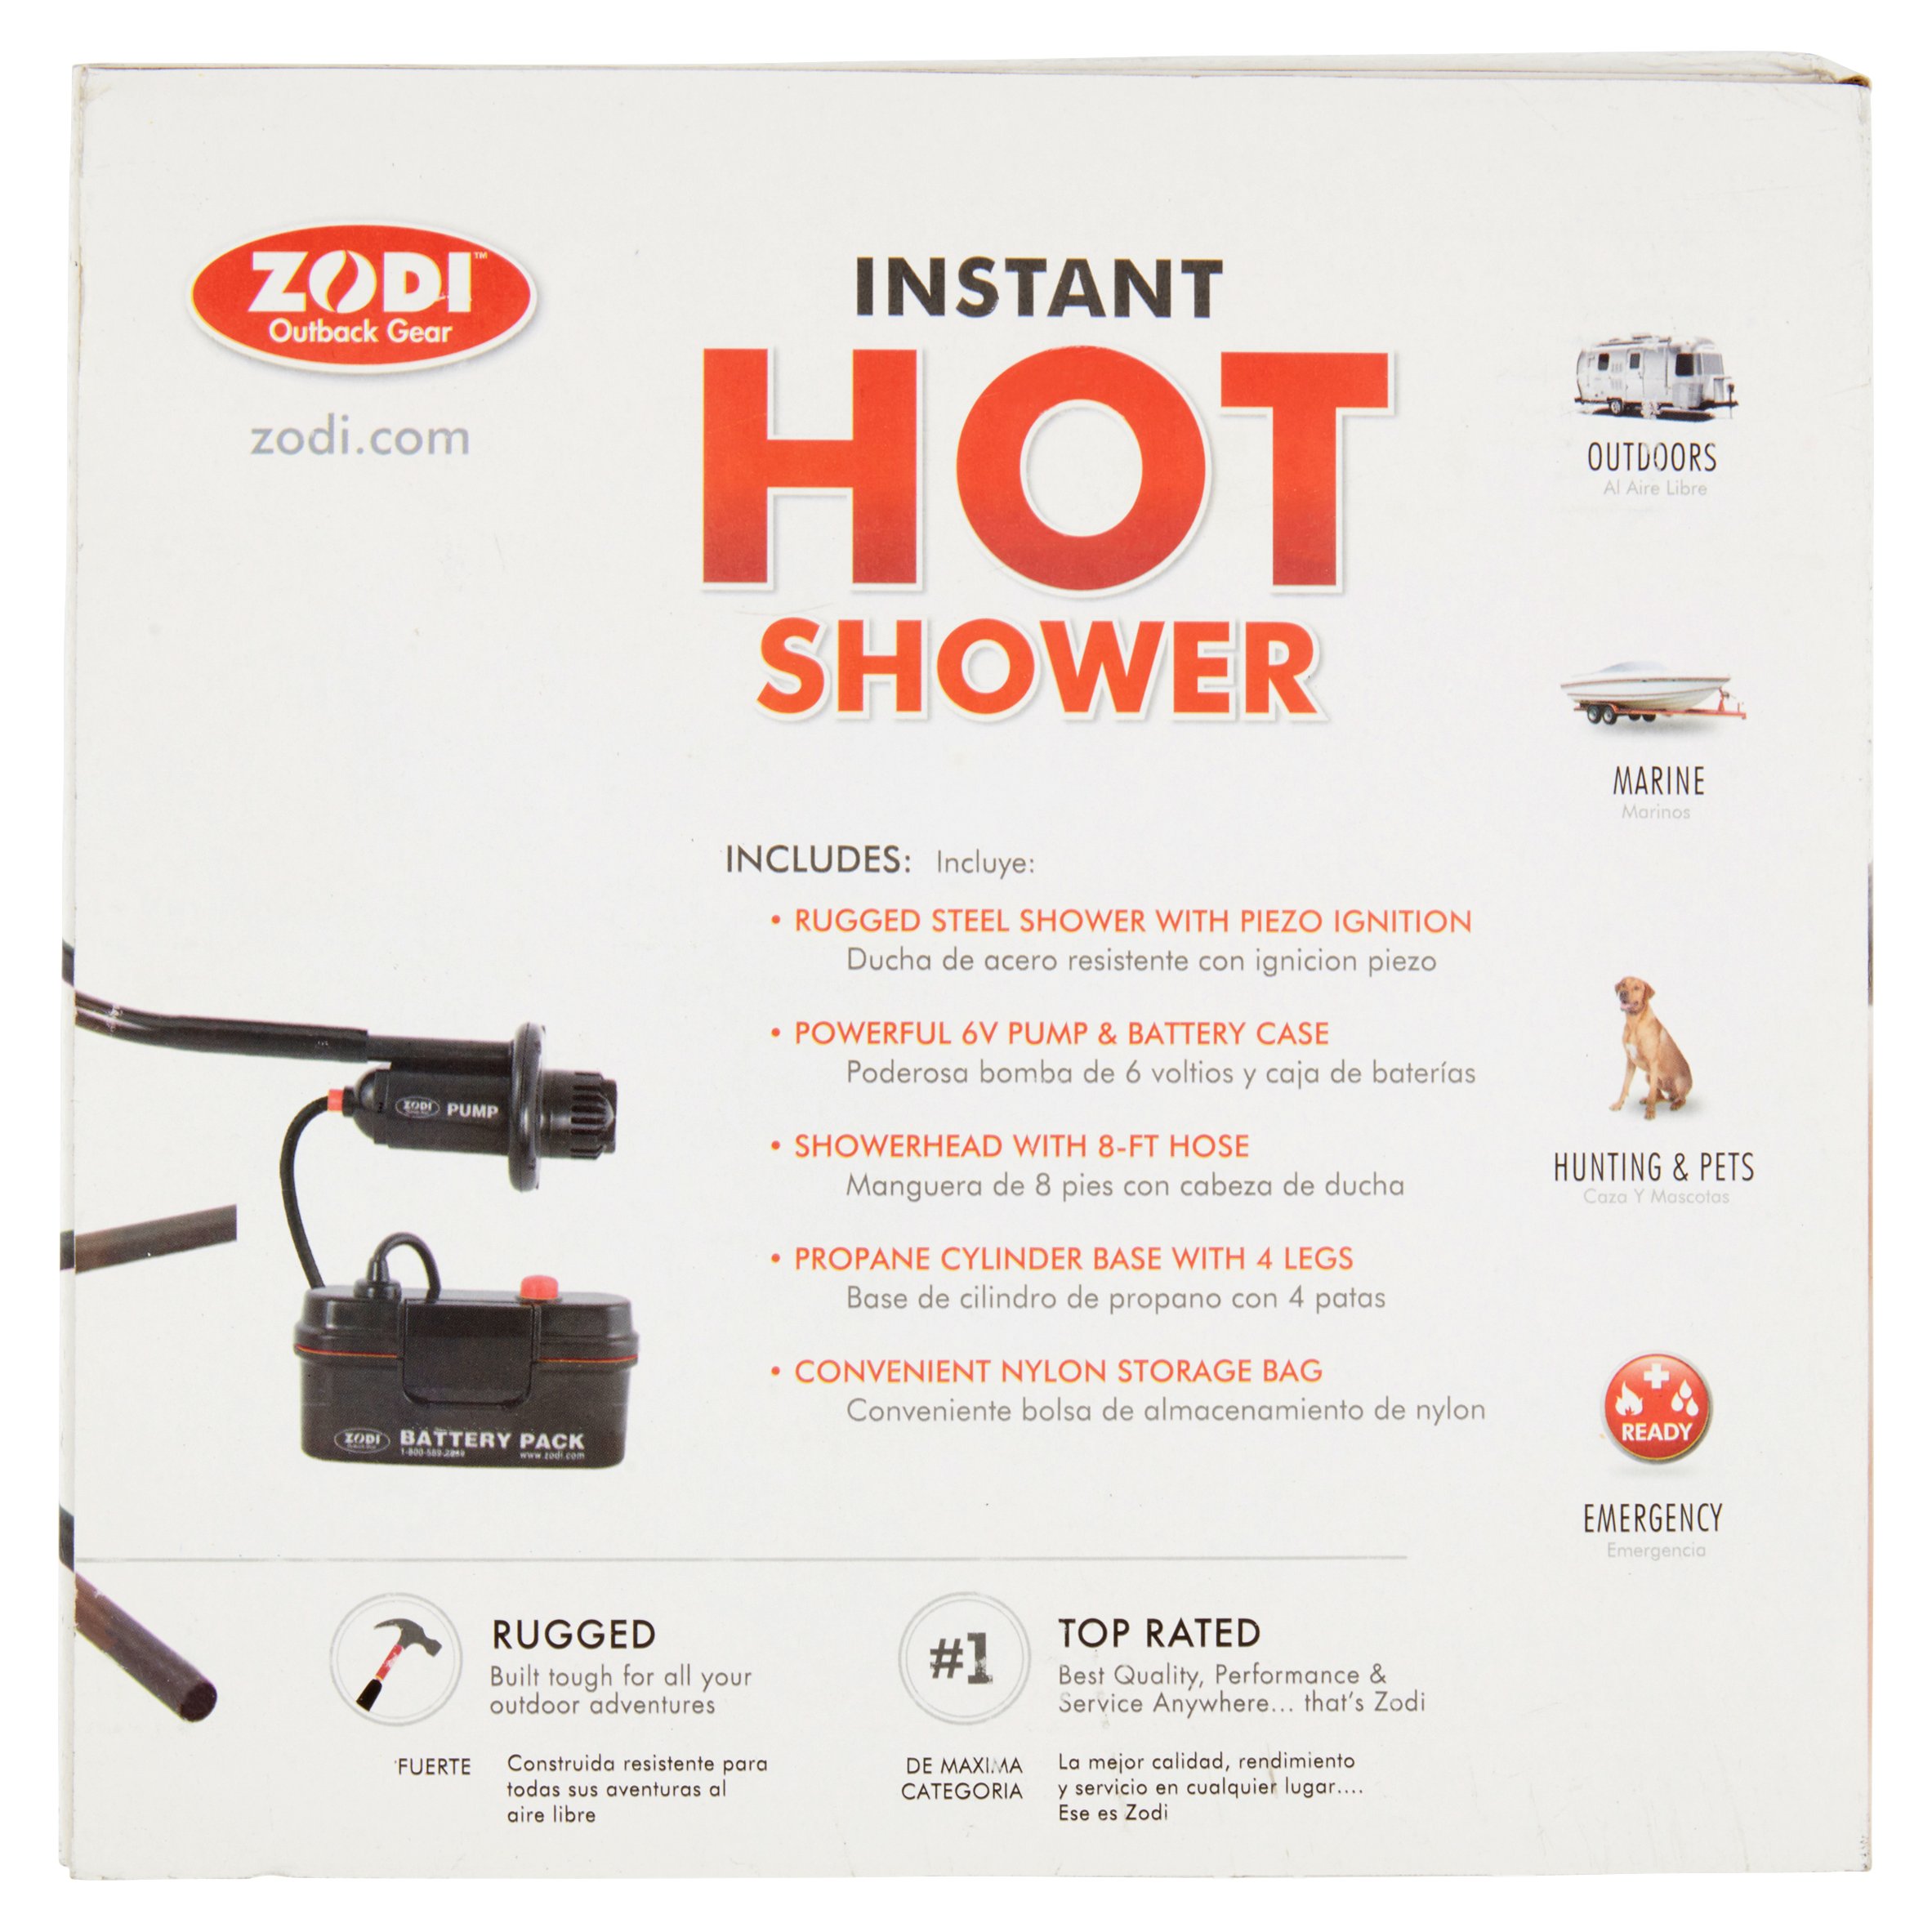 Zodi Outback Gear Instant Hot Shower - image 5 of 5